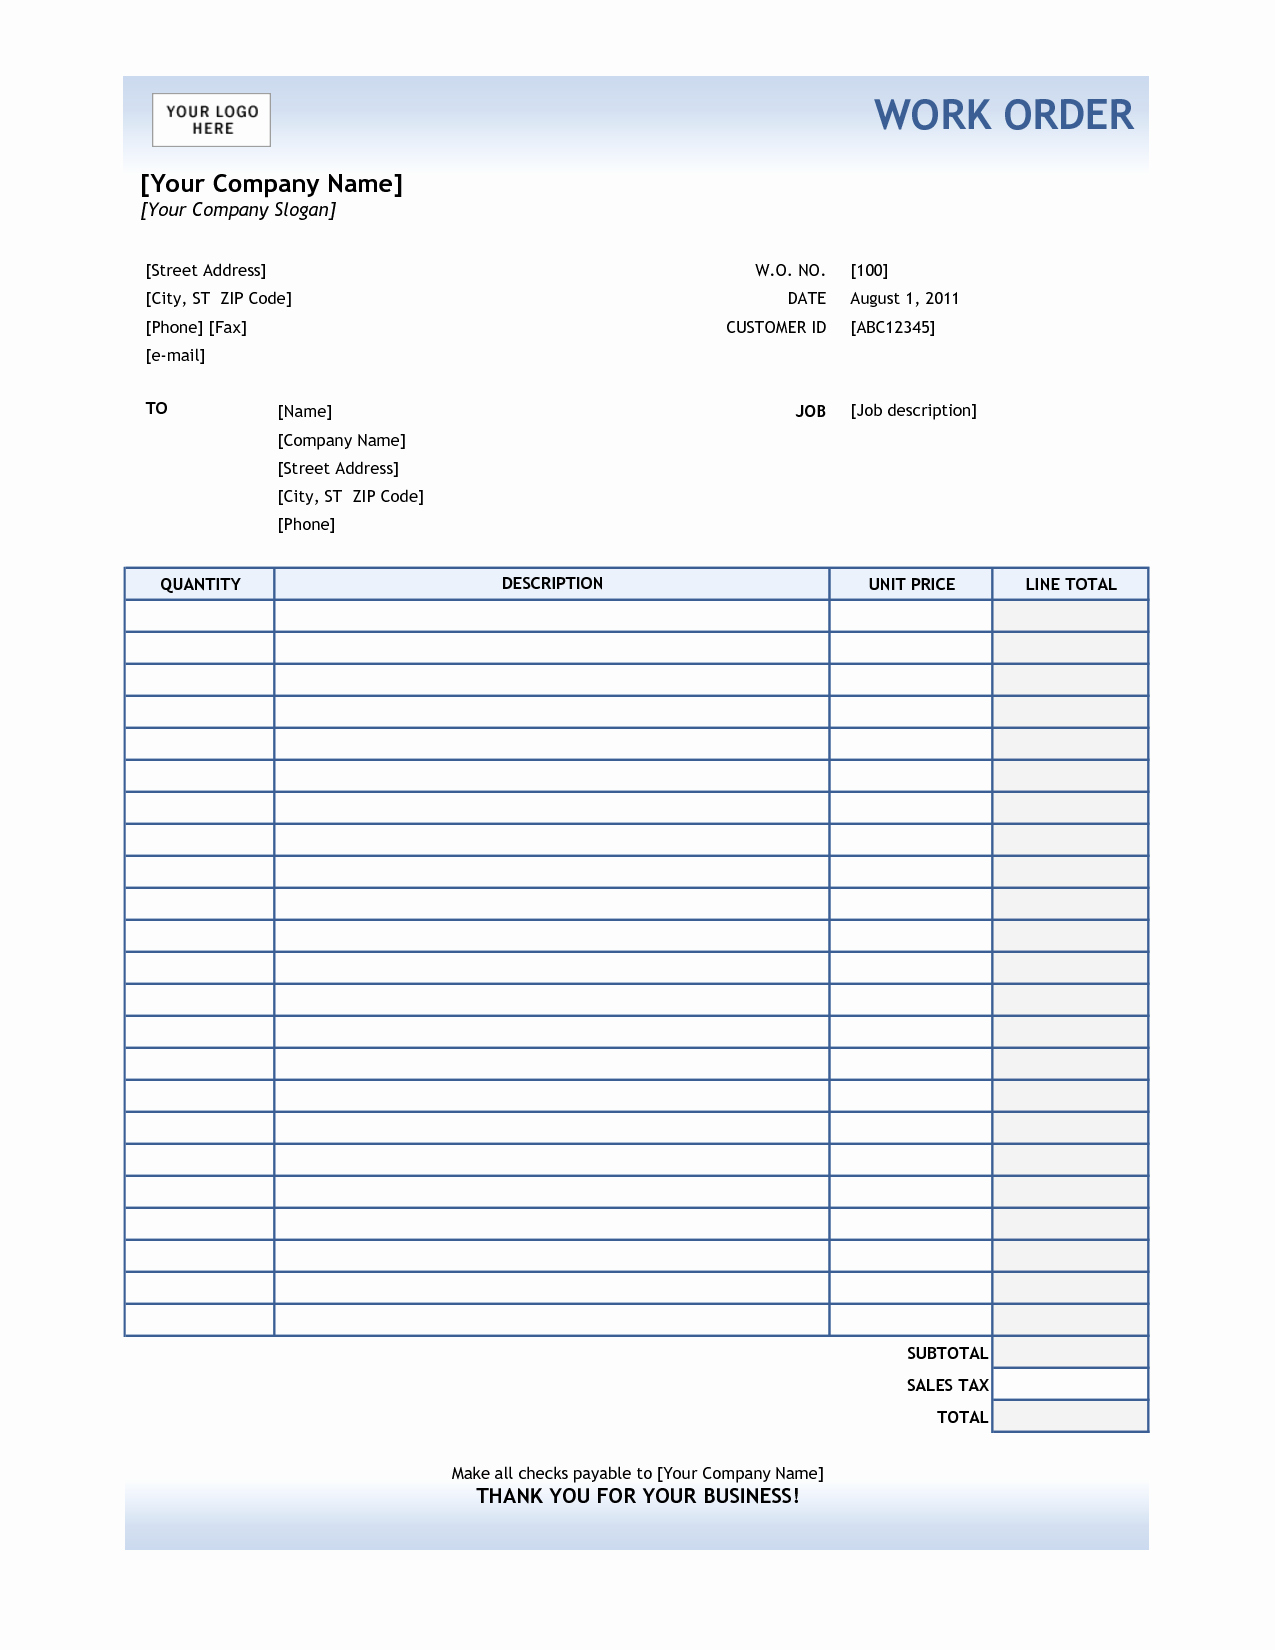 Sales order form Template Free Beautiful order form Template